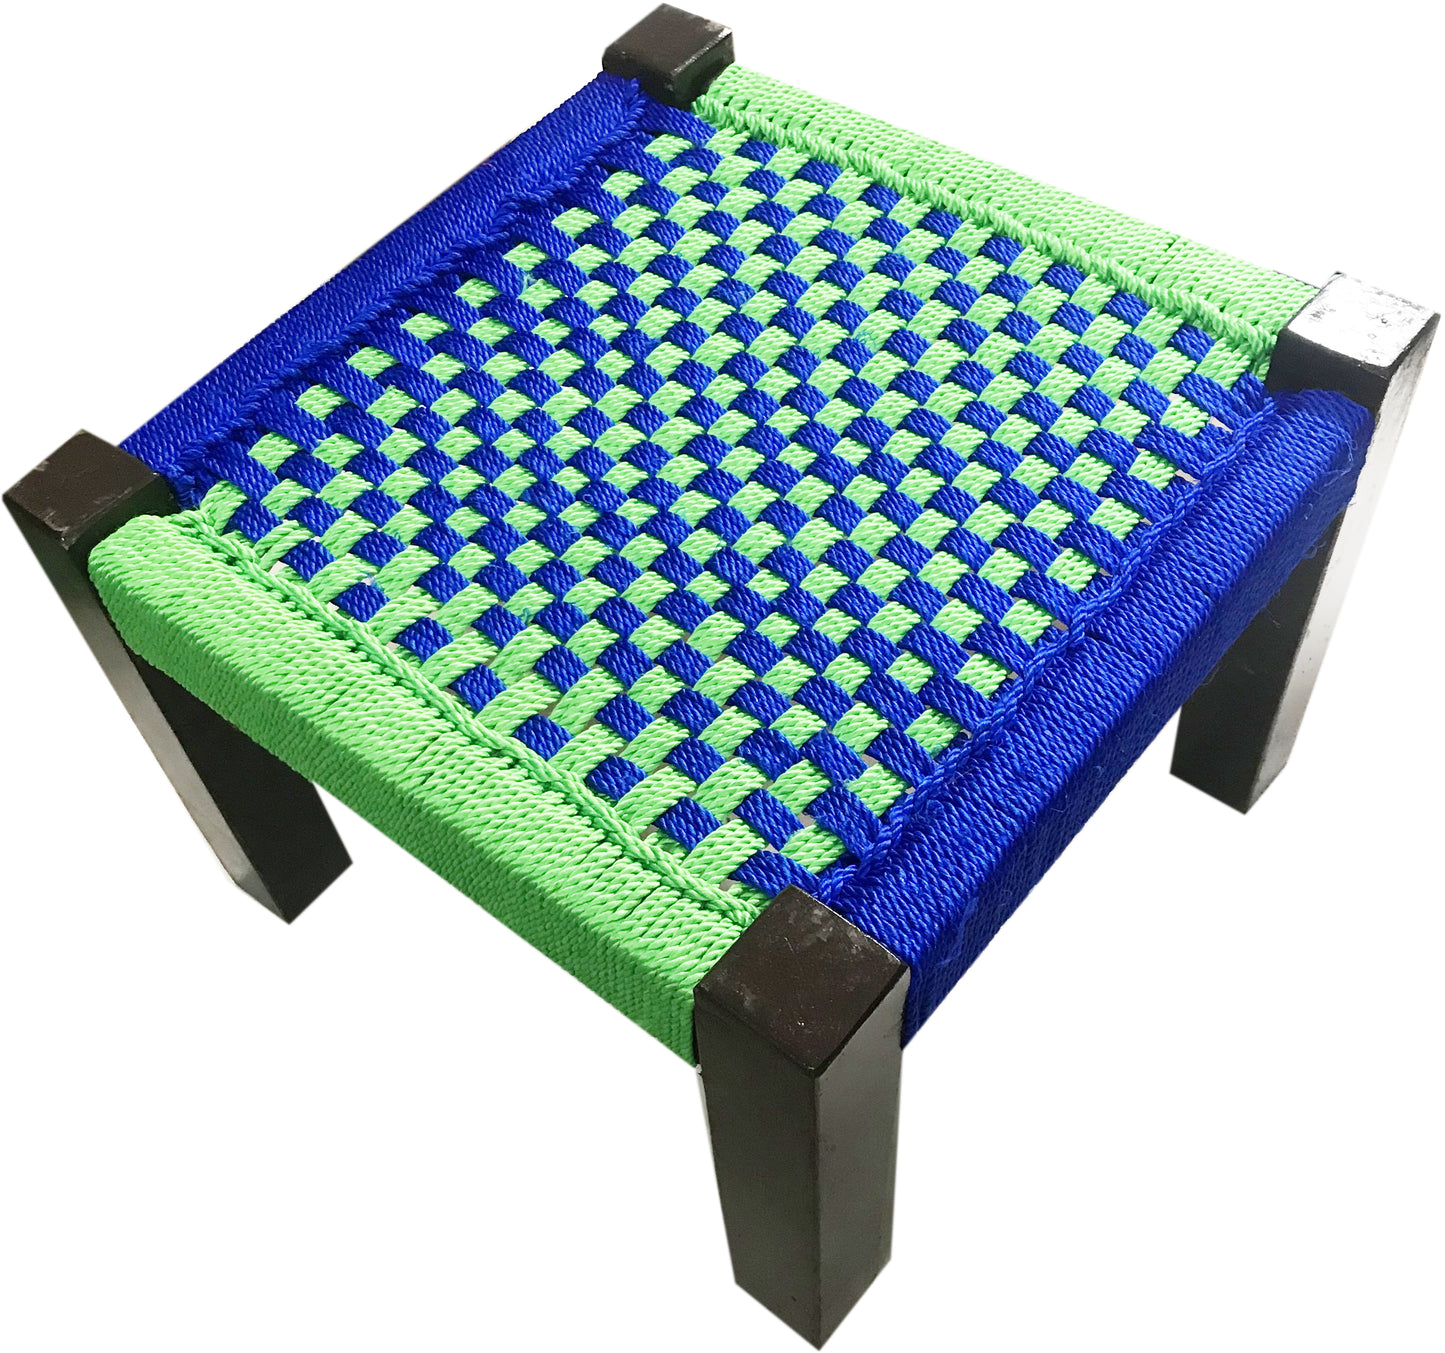 Wooden Weaving Chowki With Green & Blue Chess Board Pattern for balcony furniture